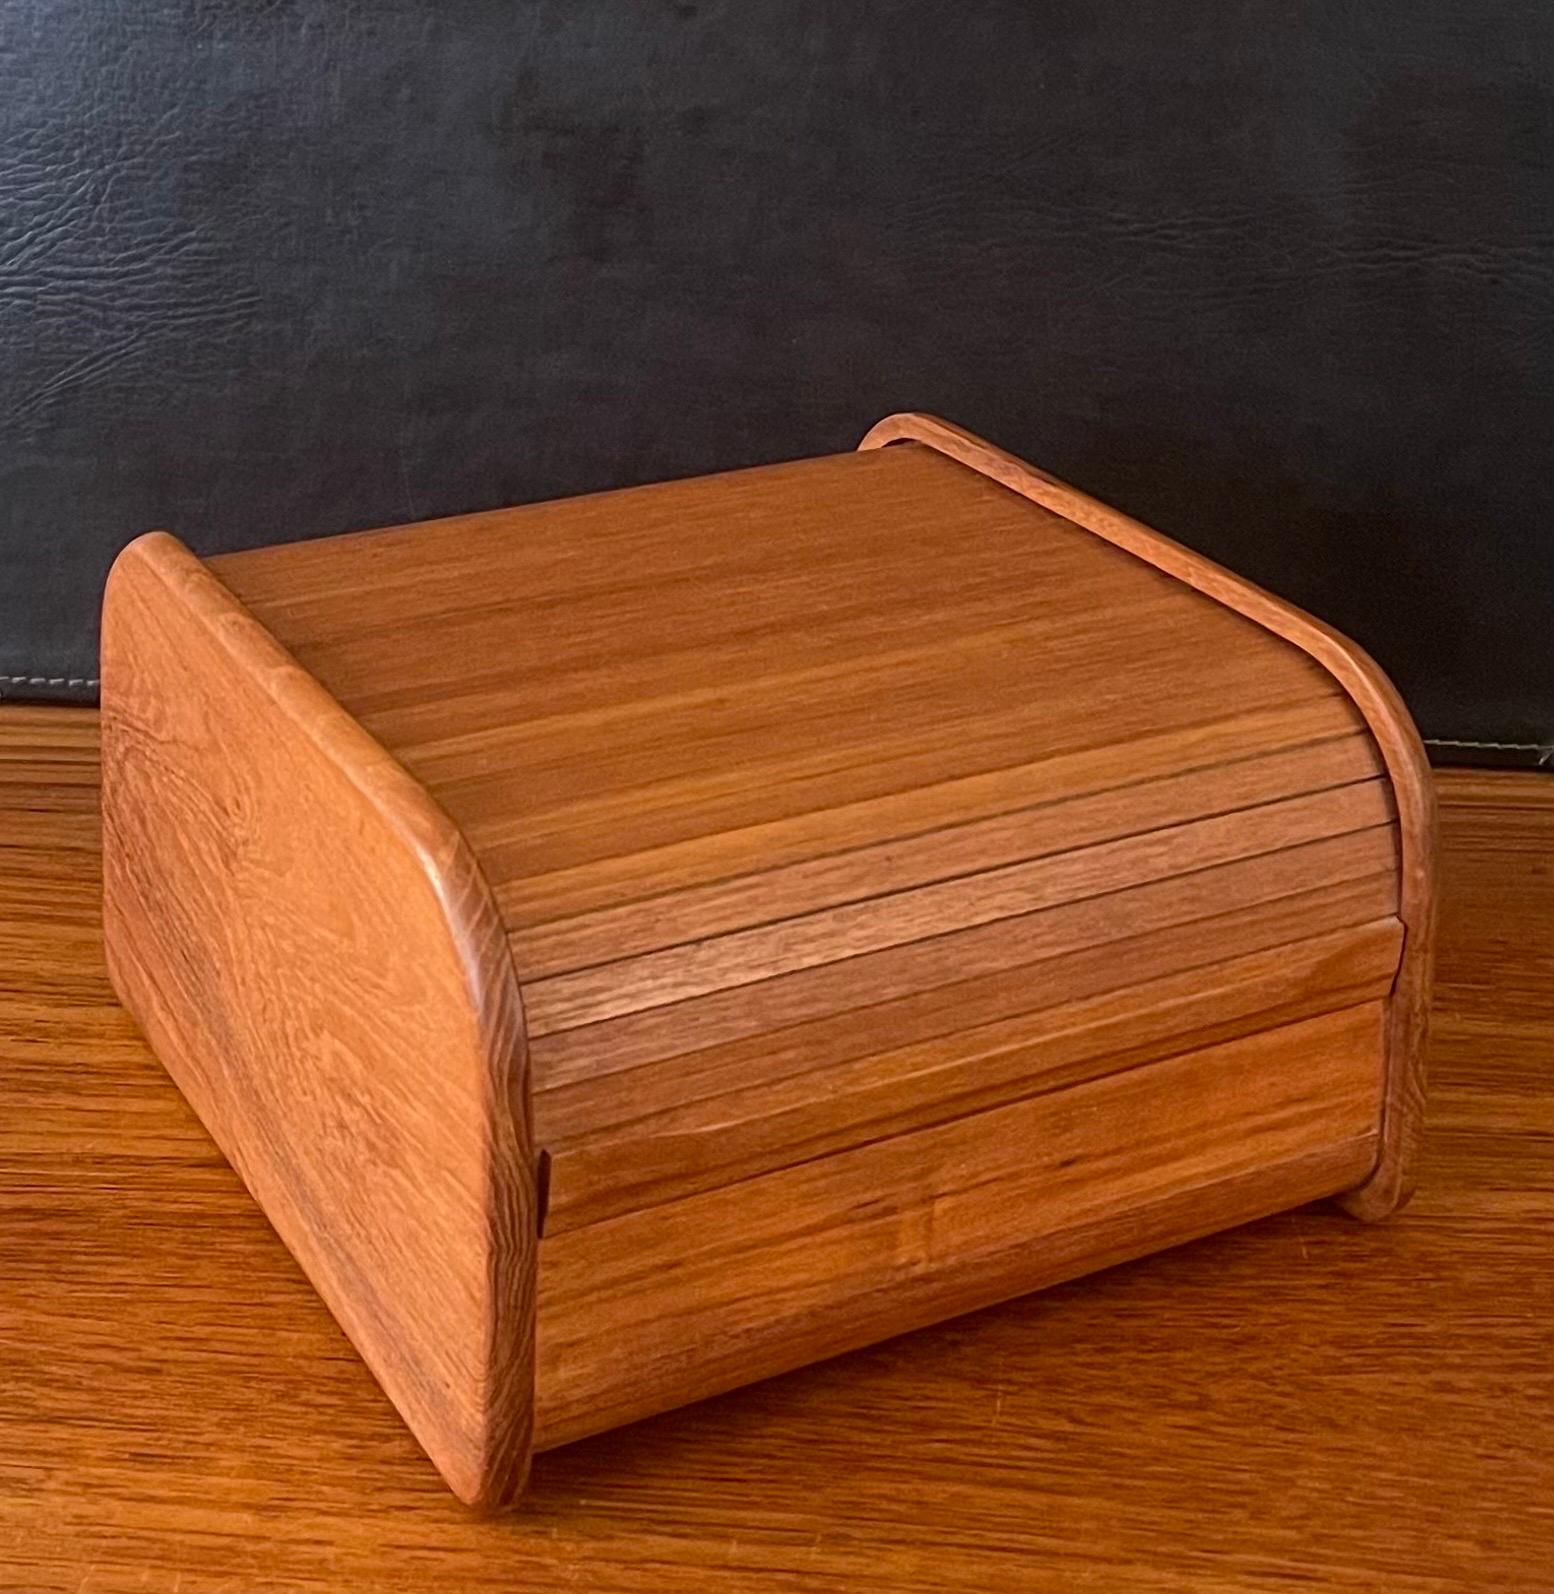 A very nice Danish modern solid teak tambour door box, circa 1970s.  The box is in very good vintage condition and measures 9.75